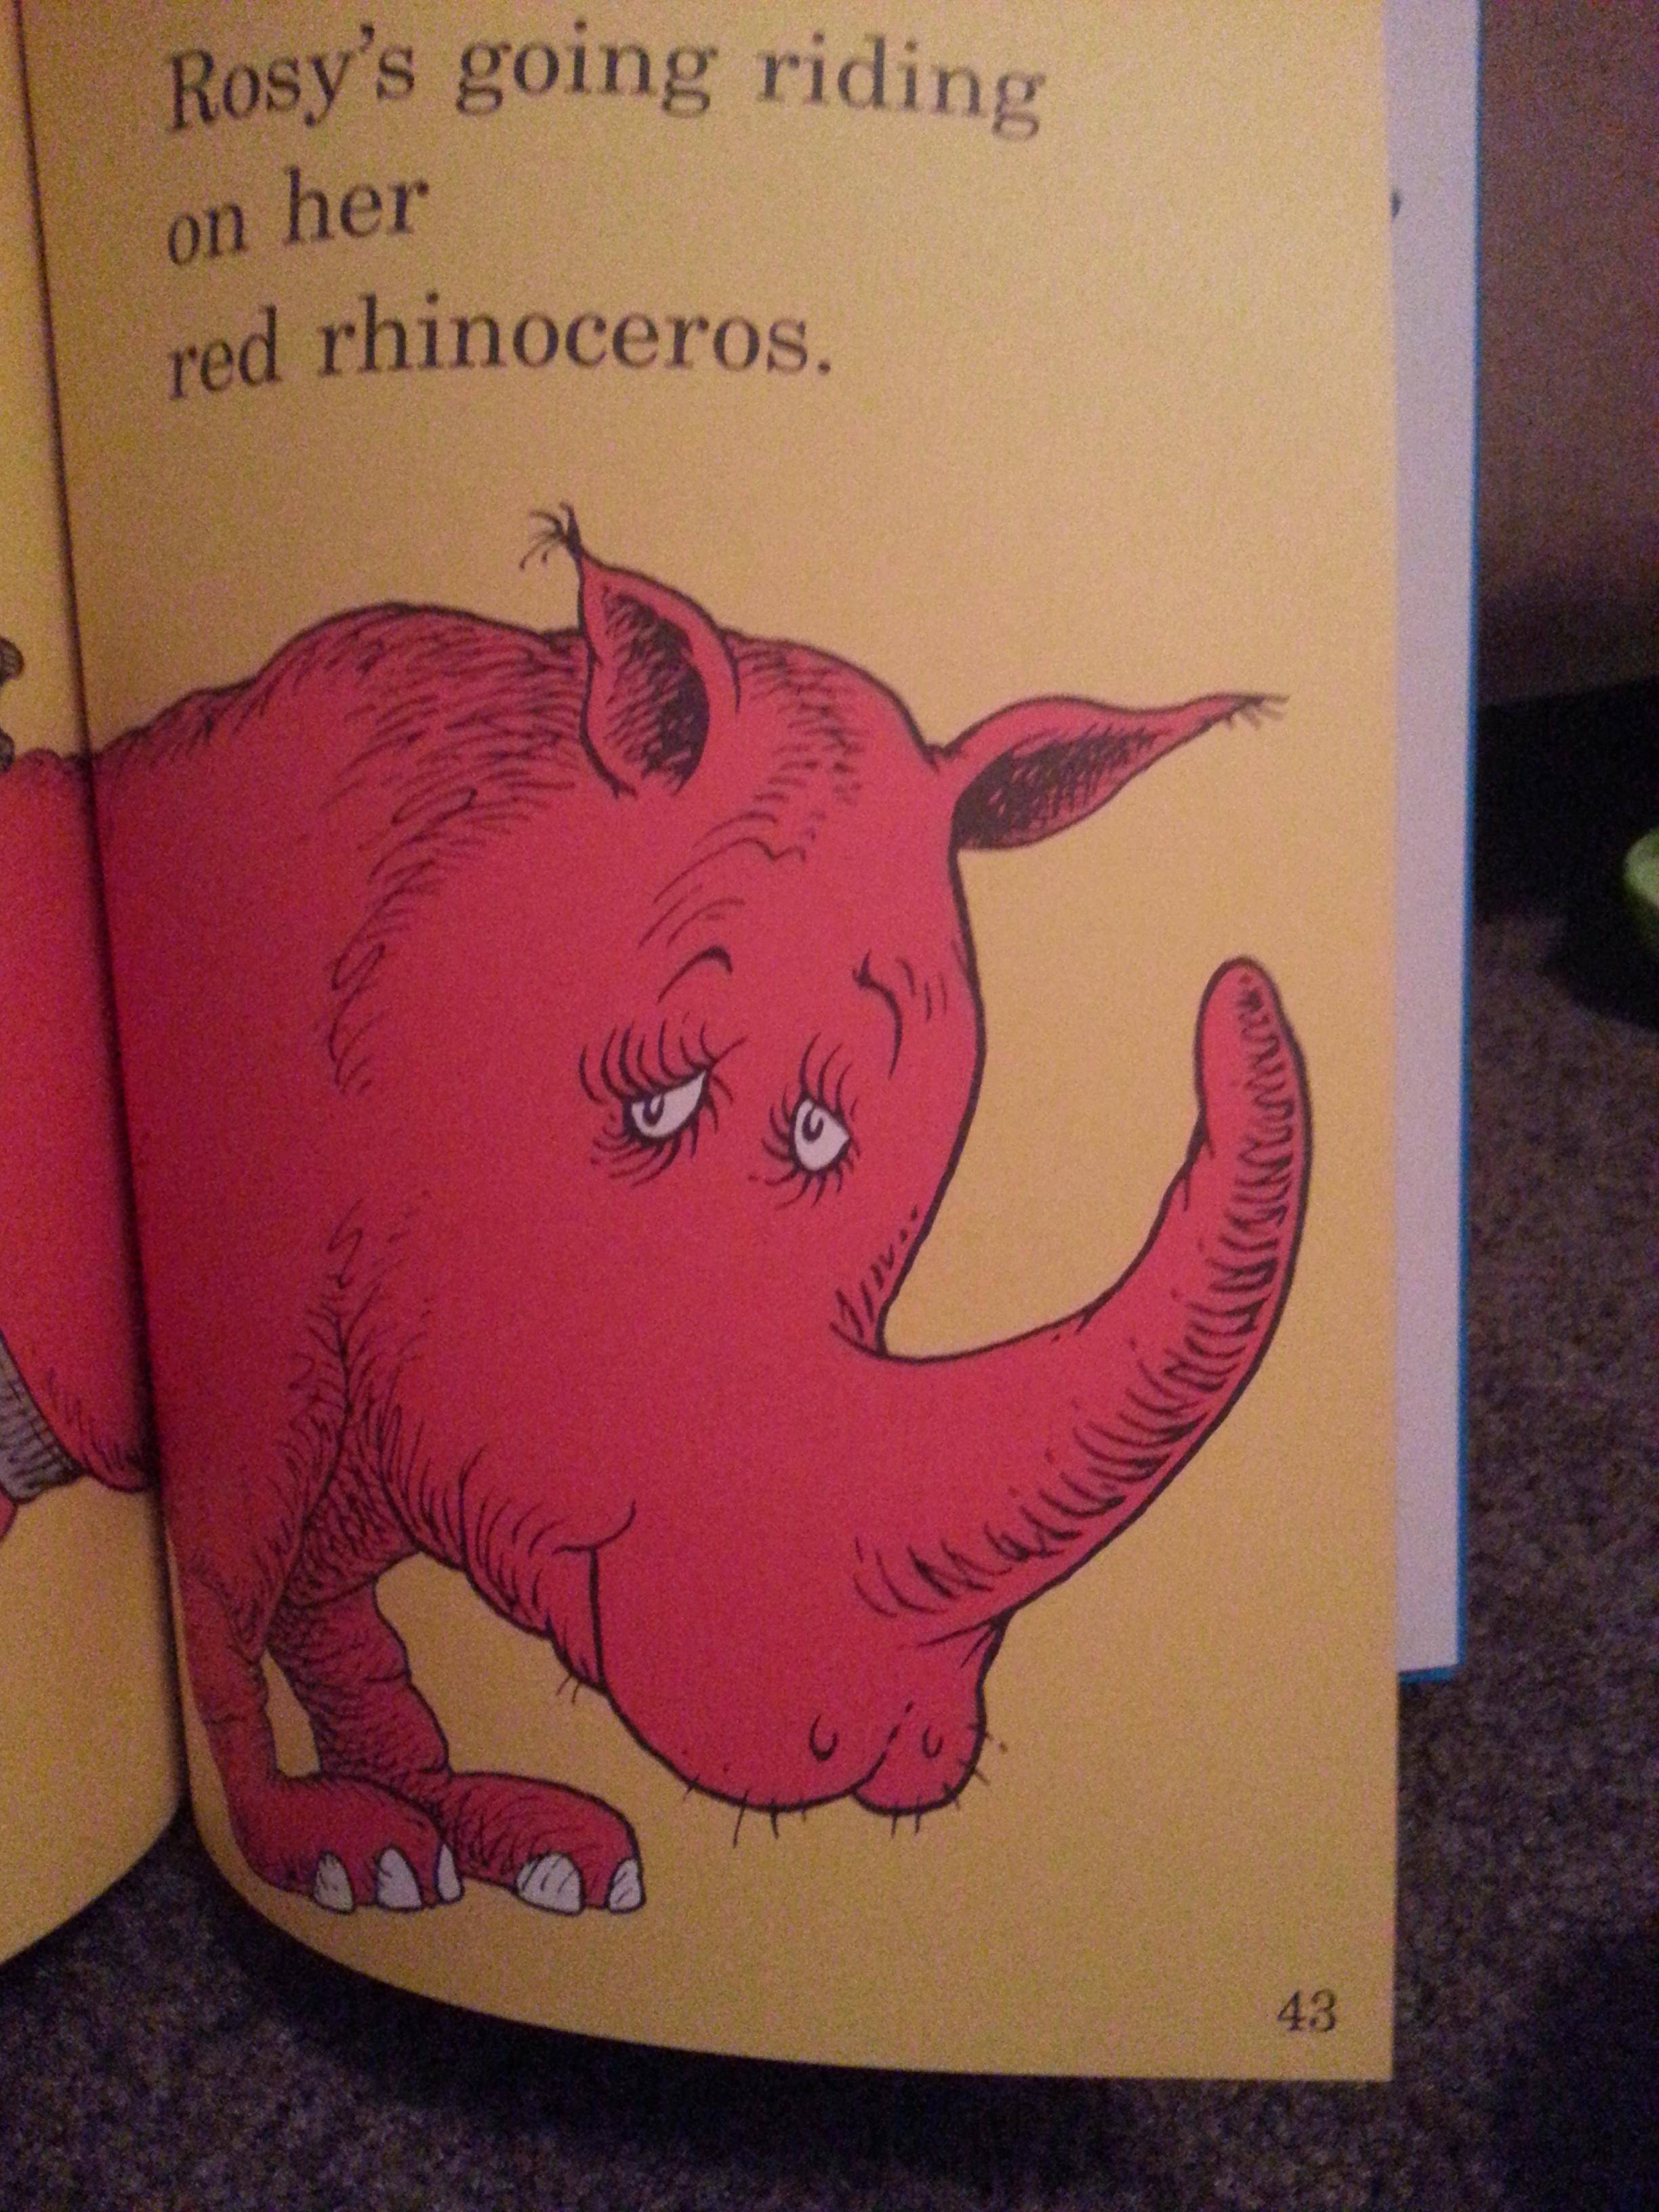 internet ruined my childhood - Rosy's going riding on her red rhinoceros.